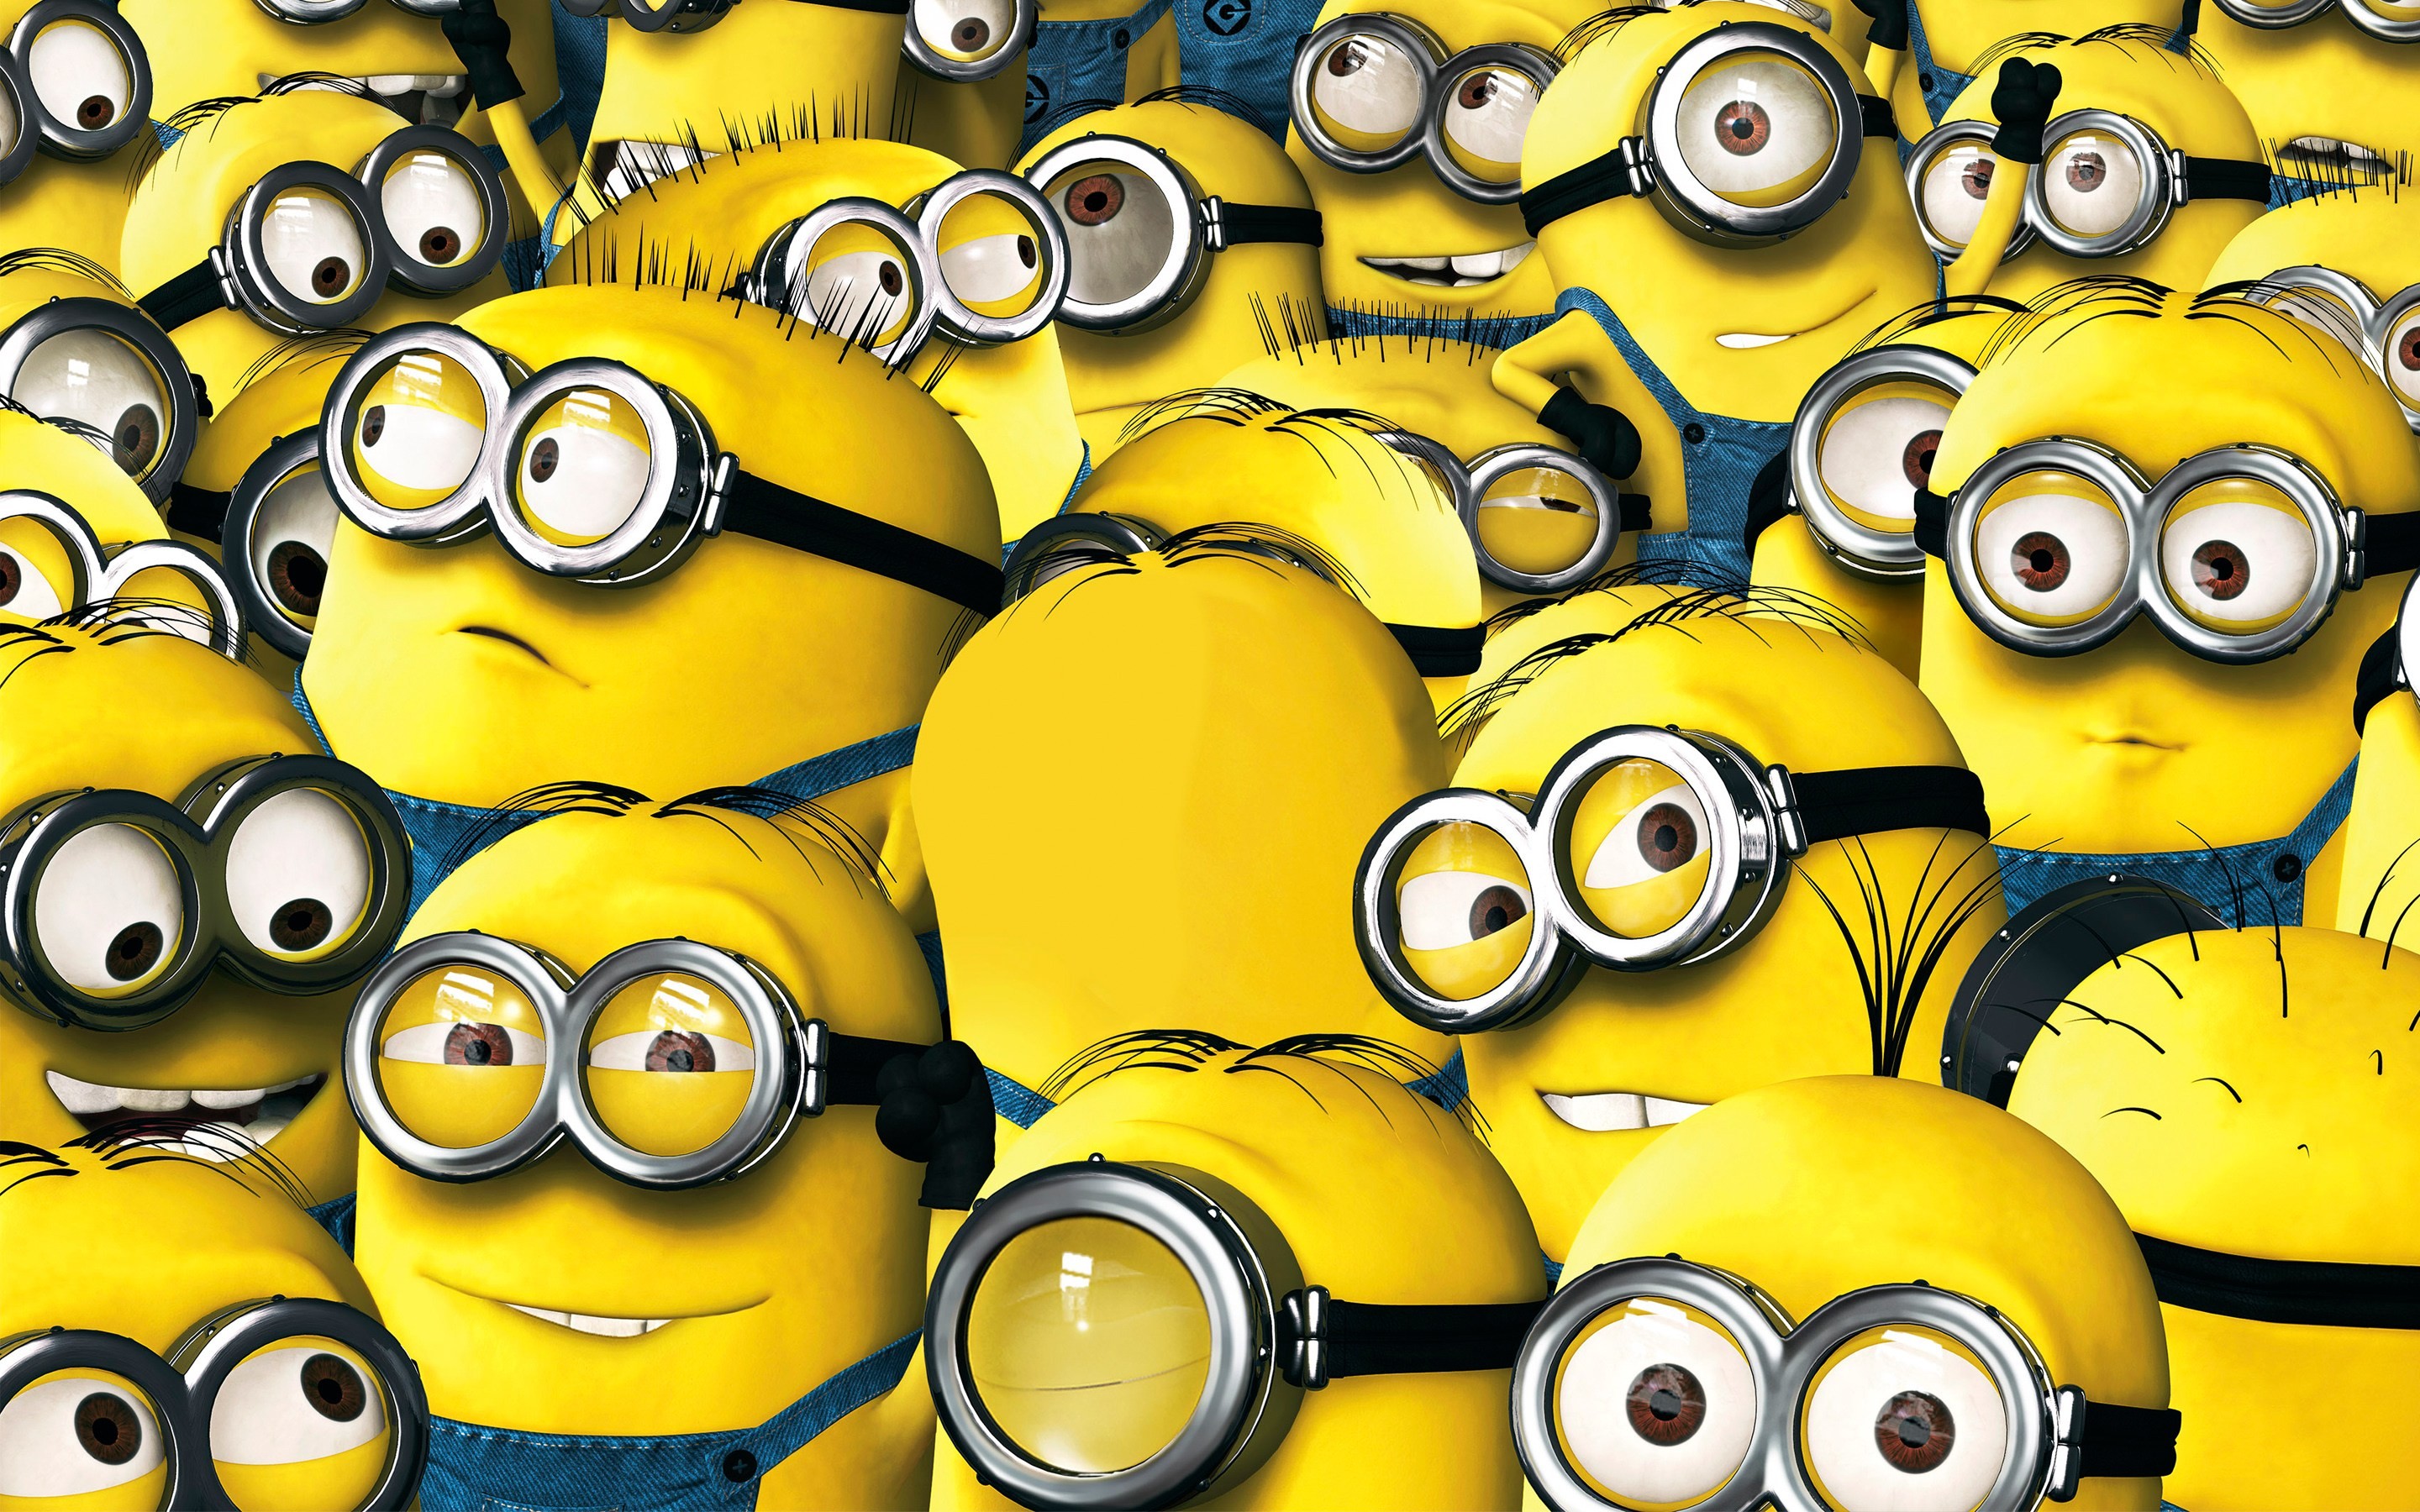 2880x1800 Despicable me wallpapers with quotes minion wallpaper wallpapersafari jpg   Images wallpaper super funny minion quotes